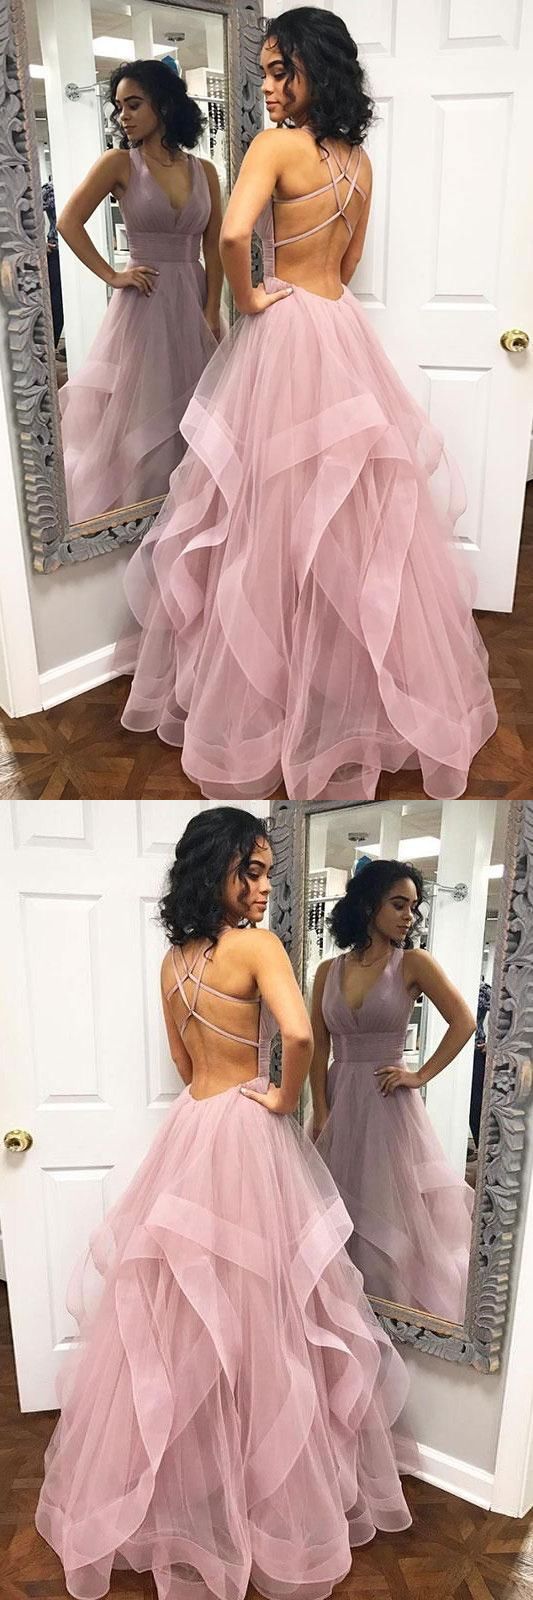 Backless Pale Pink Ball Gown Ruffle Tulle Bottom Prom Gown,Formal Long Dress,GDC1096-Dolly Gown